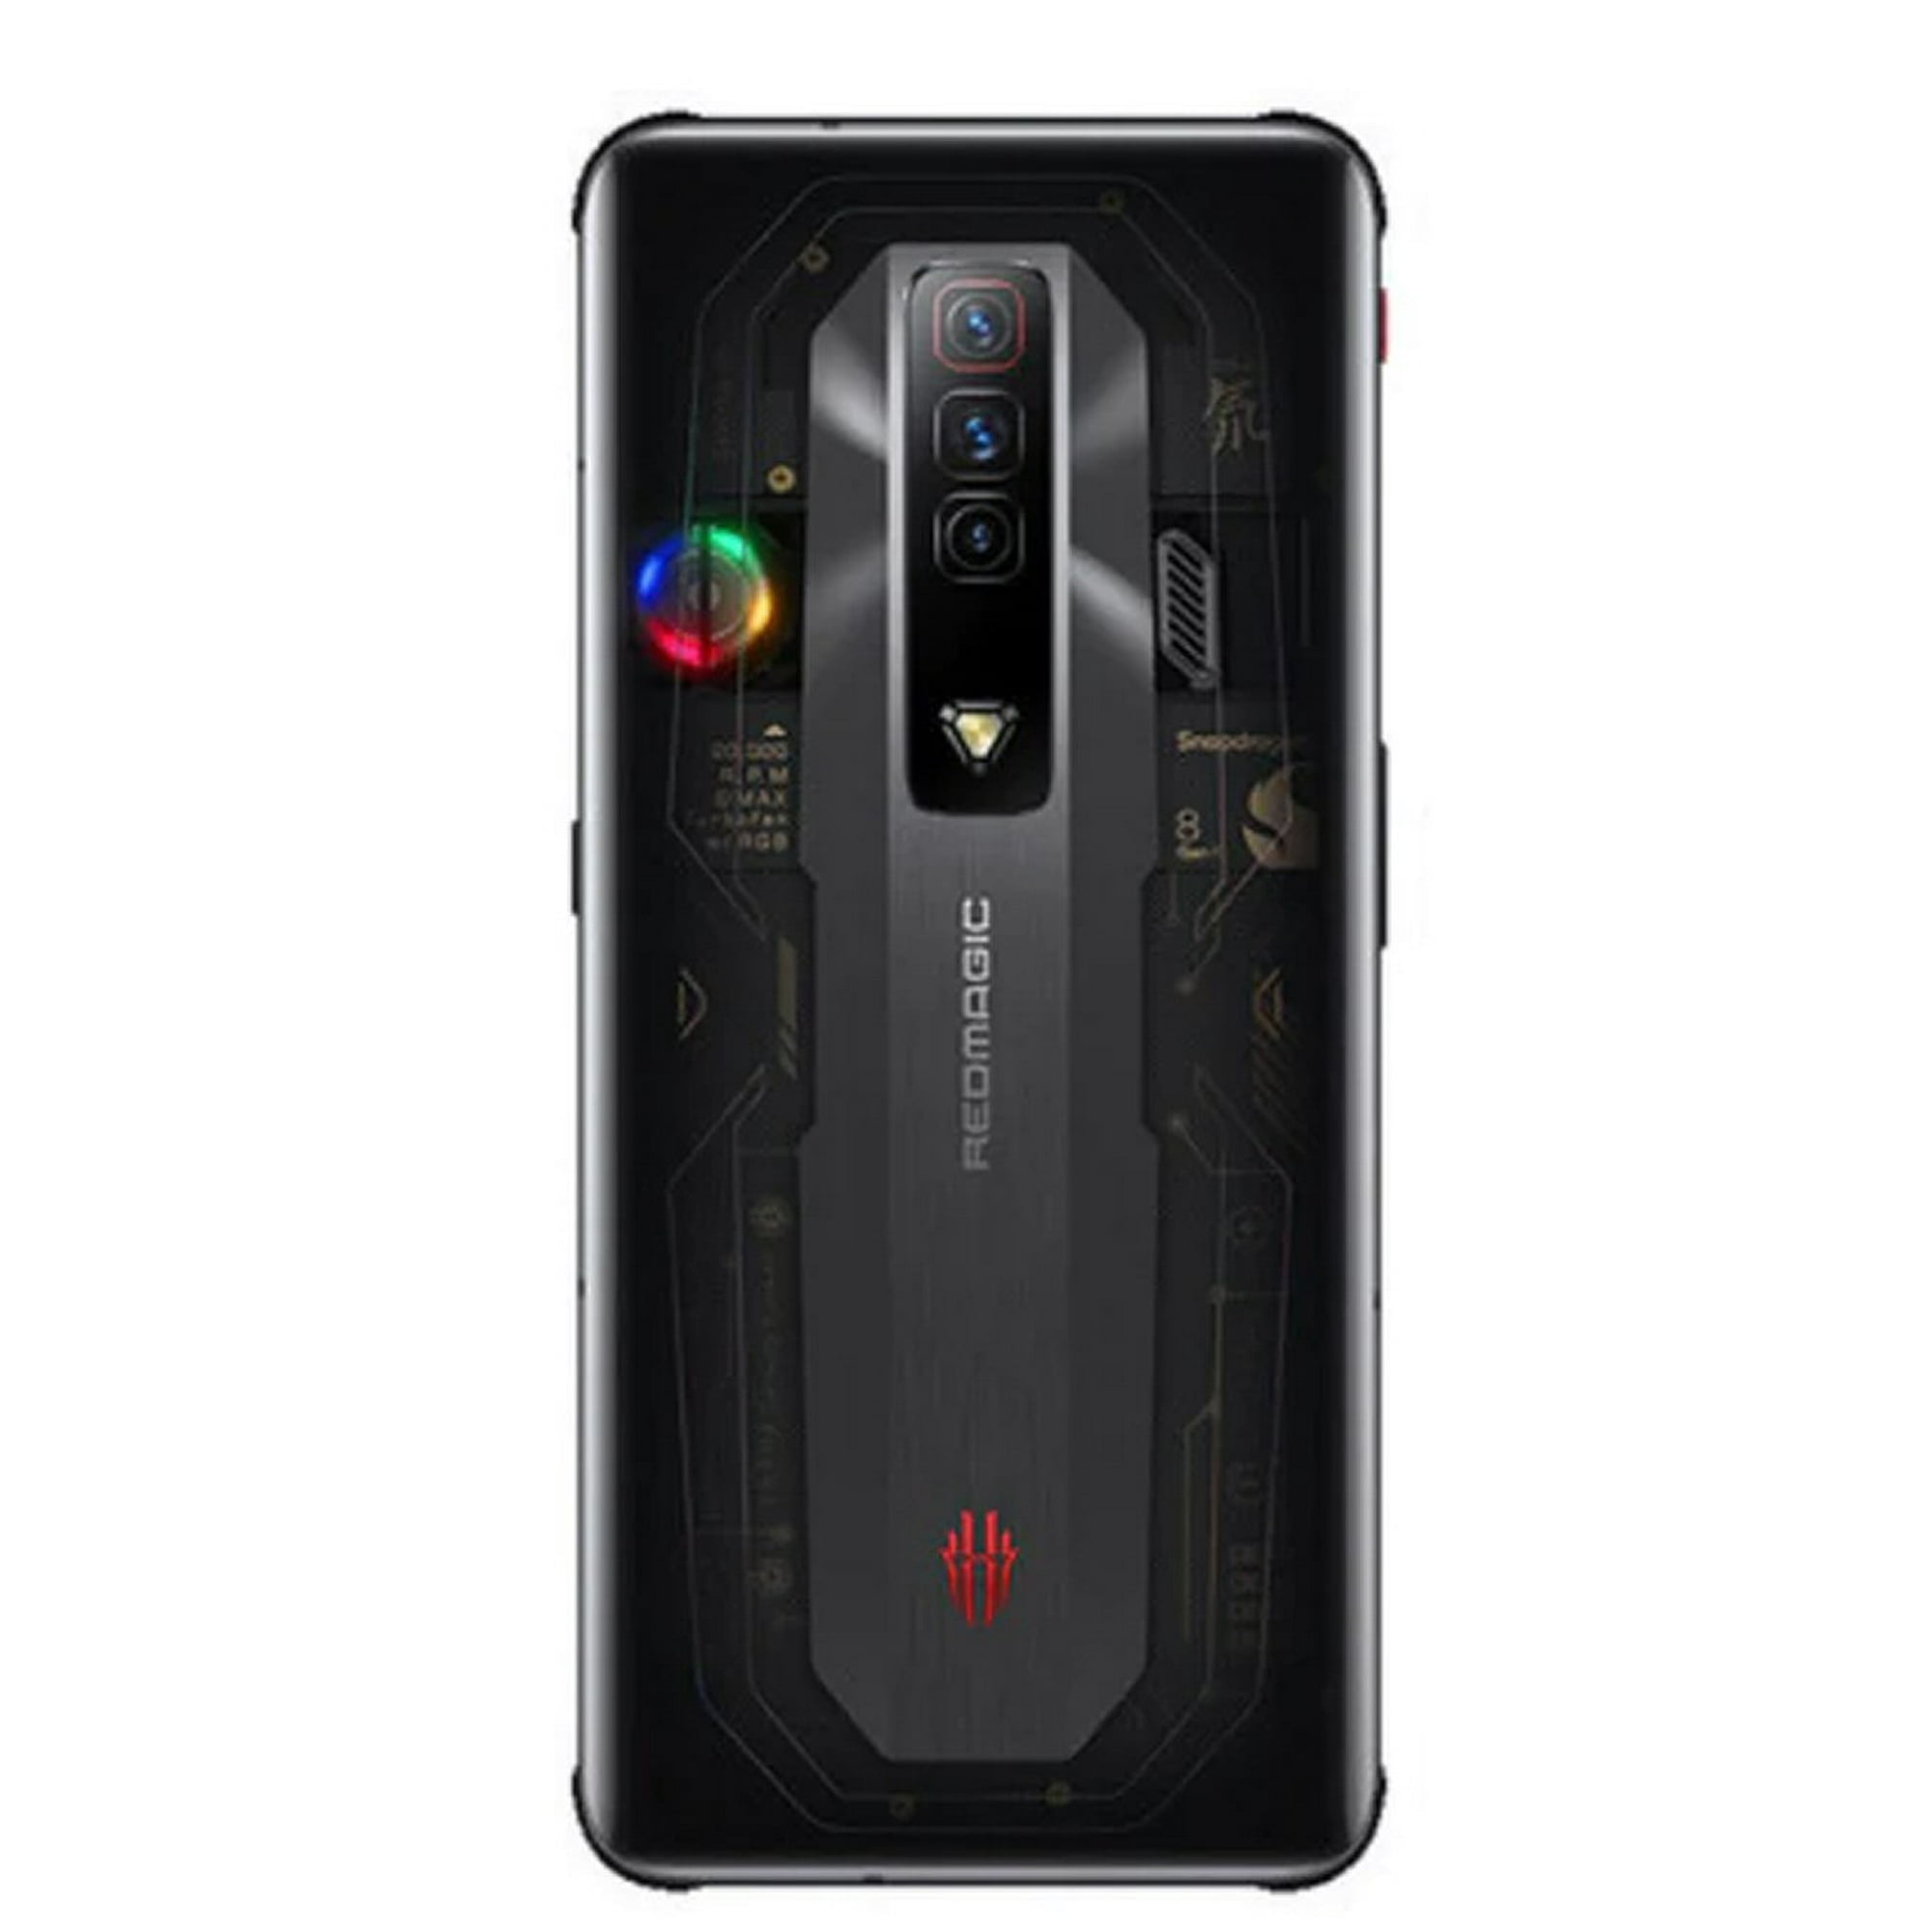 REDMAGIC 7 165Hz Gaming Phone with 6.8 Screen and 64MP Camera, 5G Android  Smartphone with Snapdragon 8 Gen 1 and 18GB+256GB, 4500mAh Battery and US